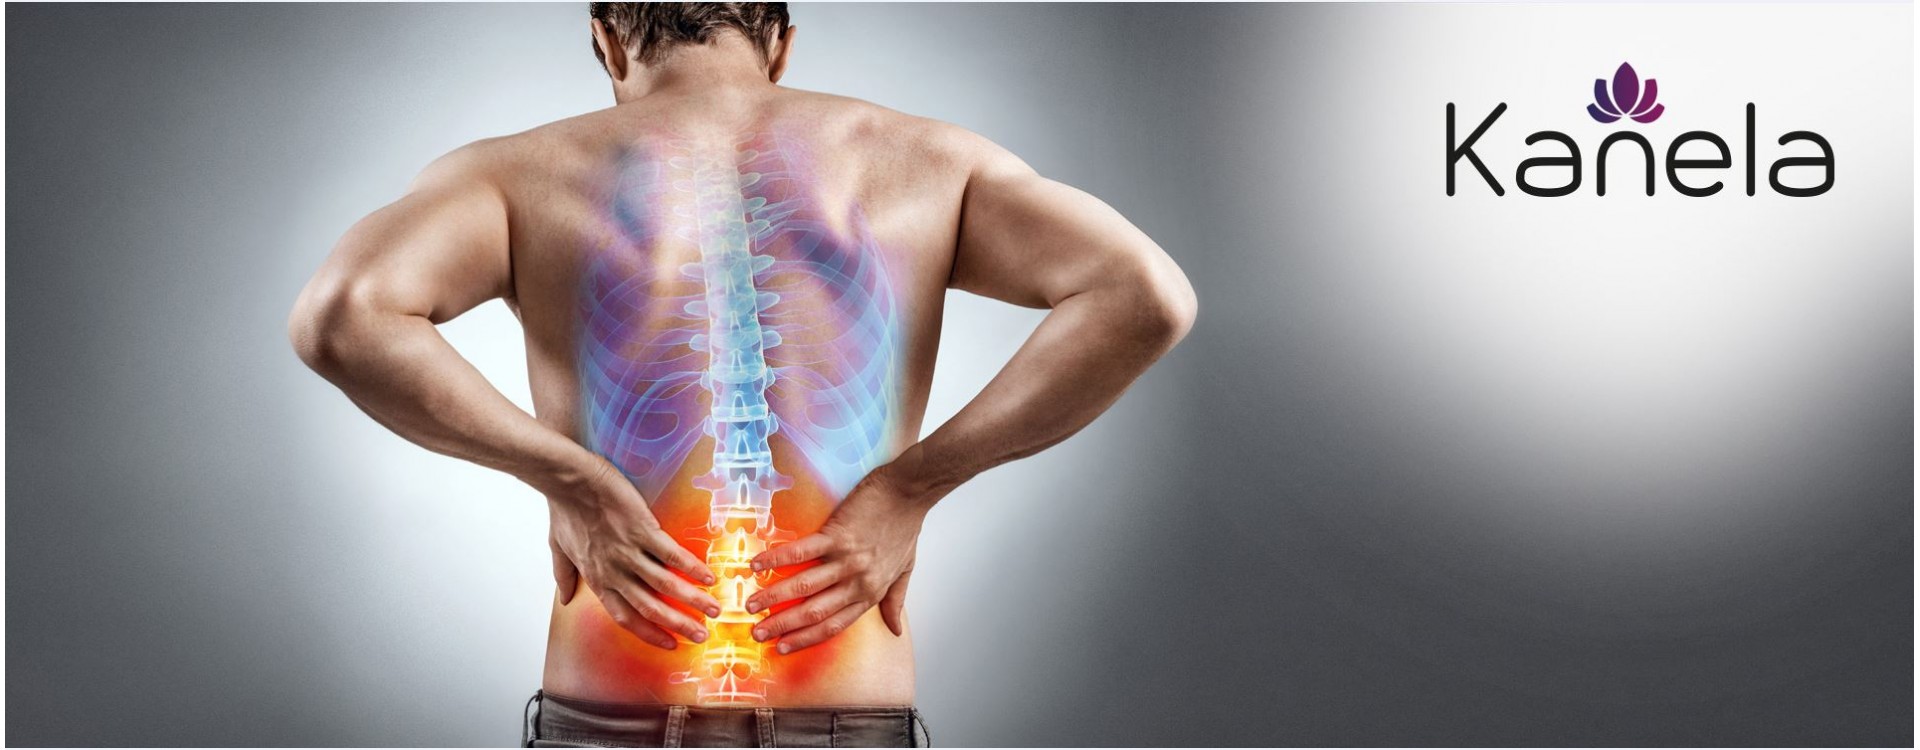 What can be done against back pain?